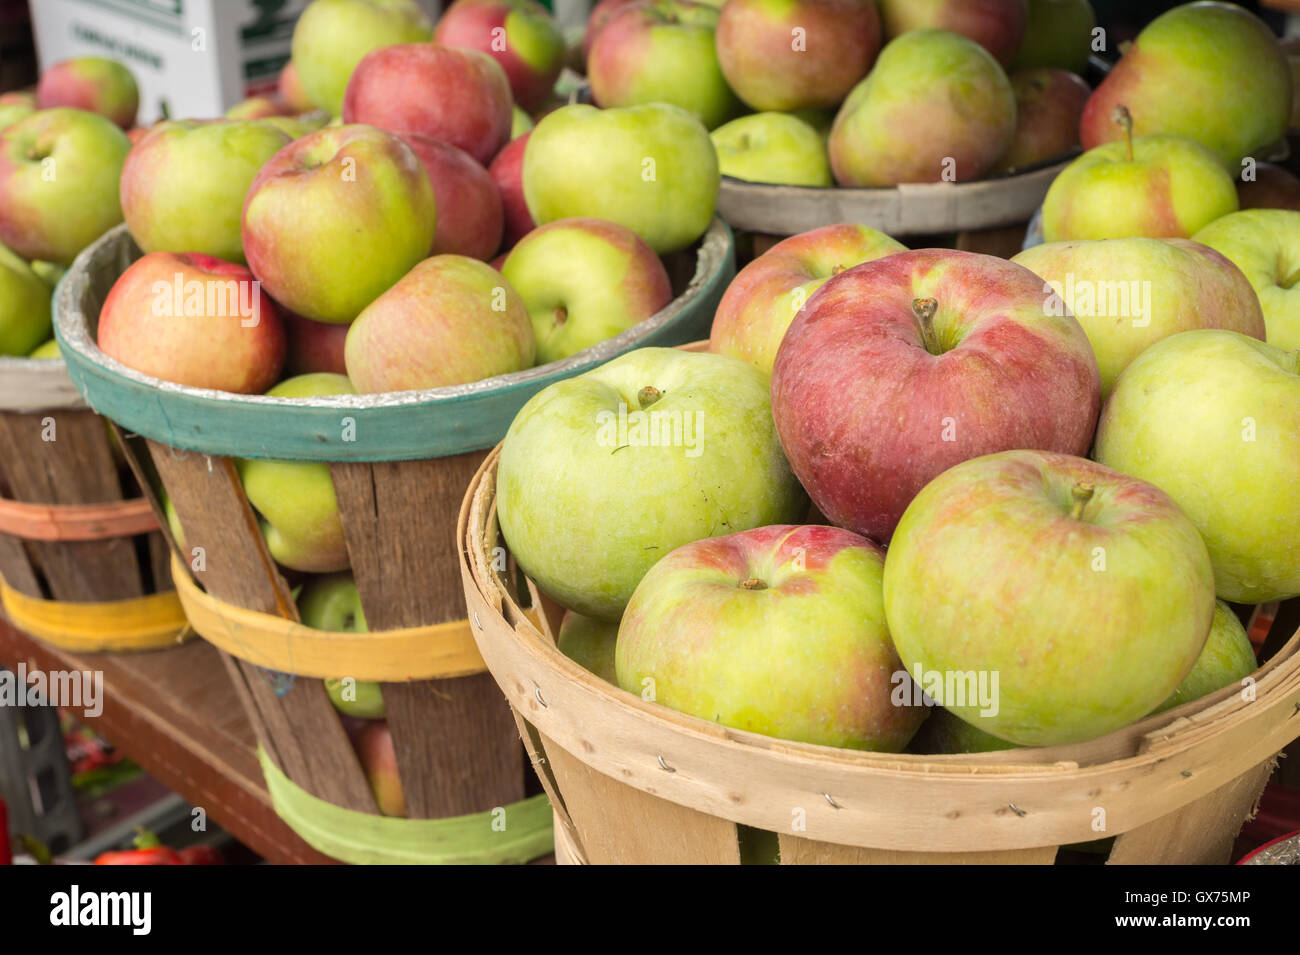 Lobo apples wooden baskets at the market Stock Photo